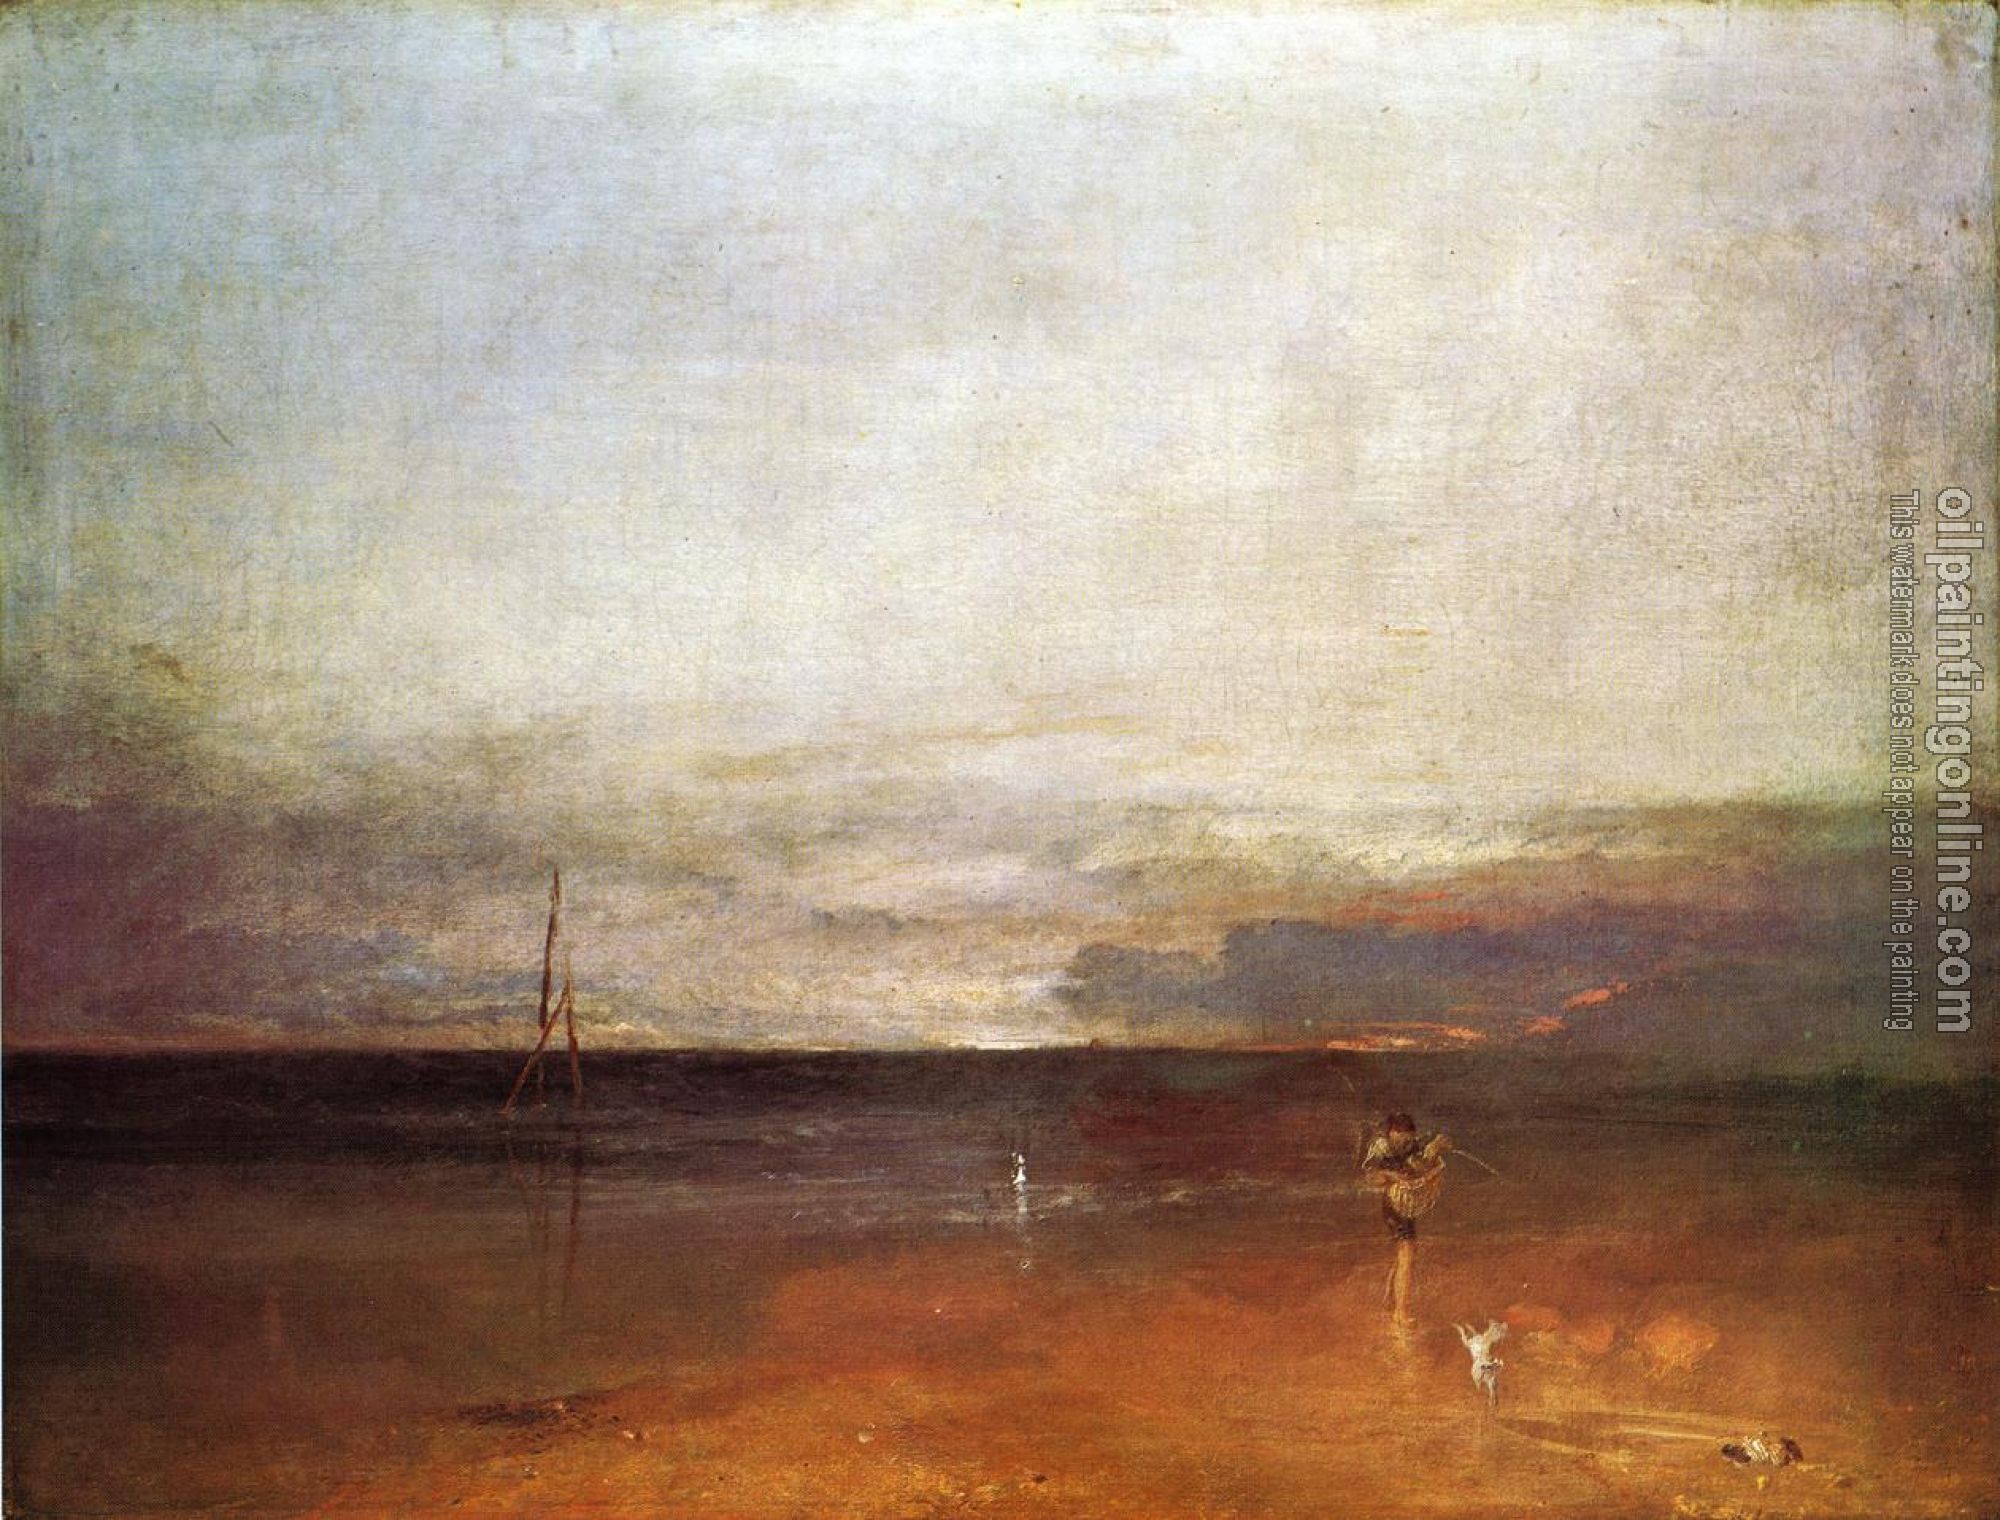 Turner, Joseph Mallord William - Rocky Bay with Figures